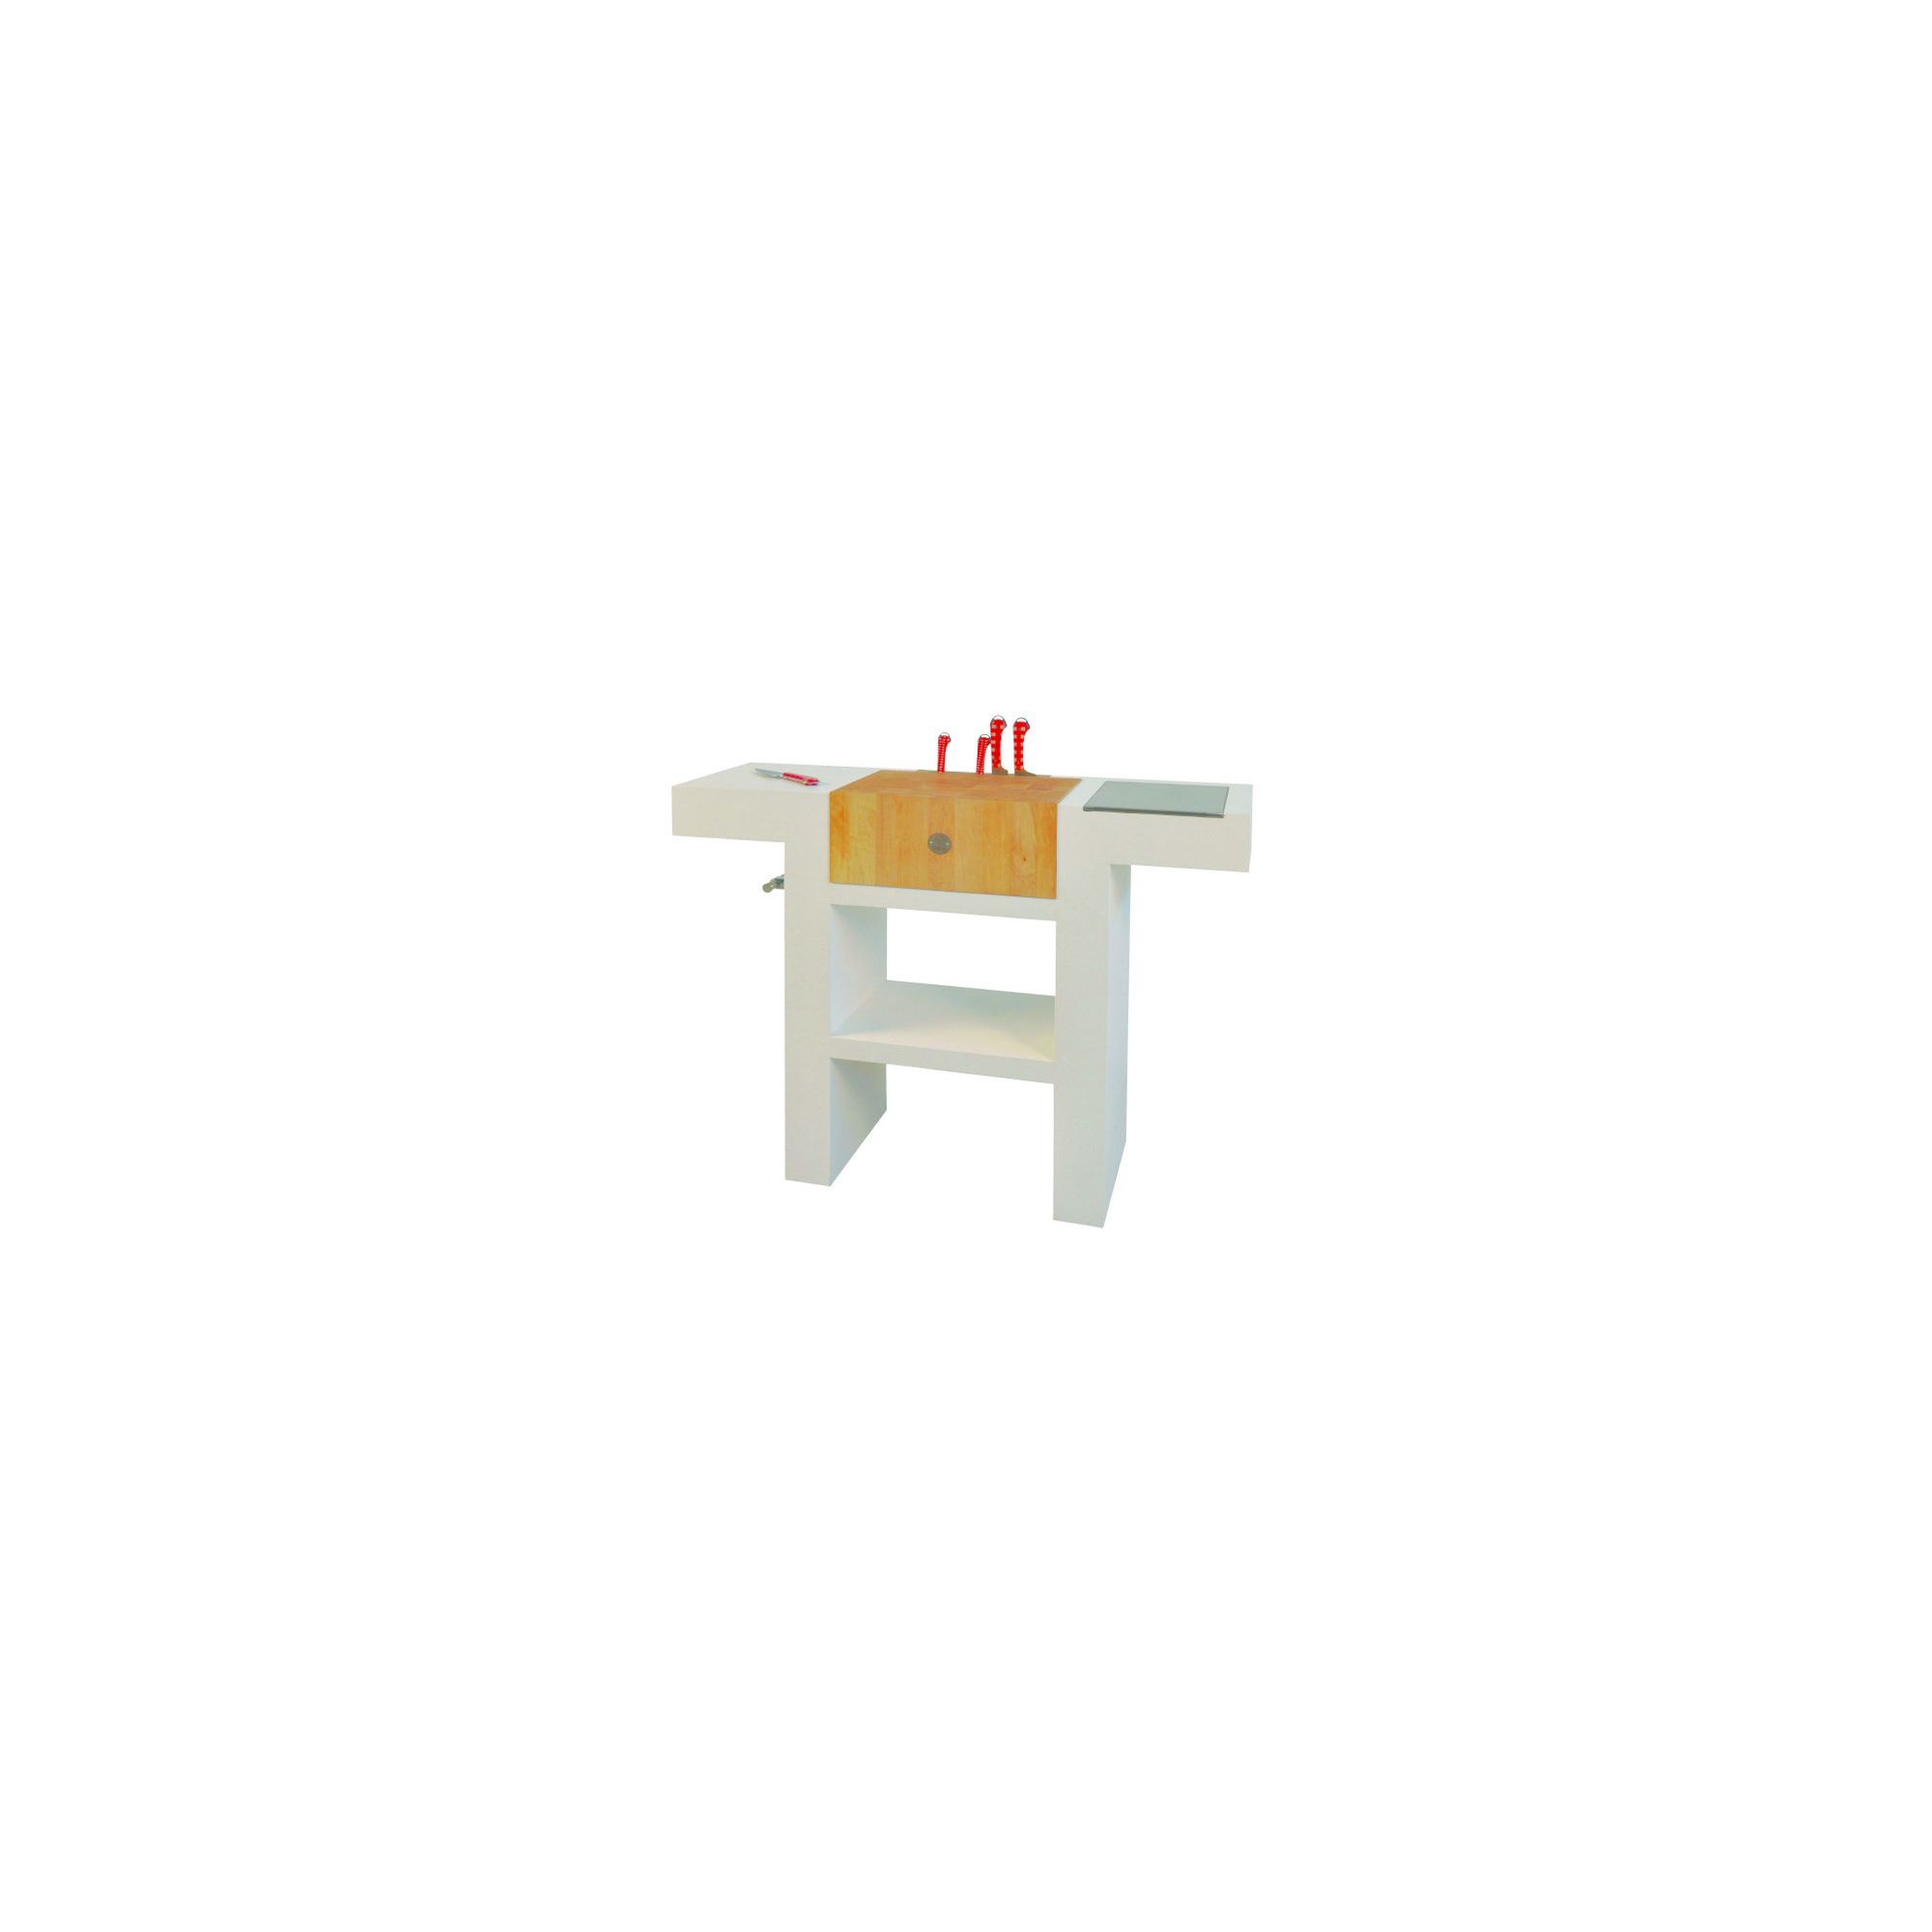 Chabret Console Block by MC Berger - 90cm X 100cm X 50cm at Tesco Direct